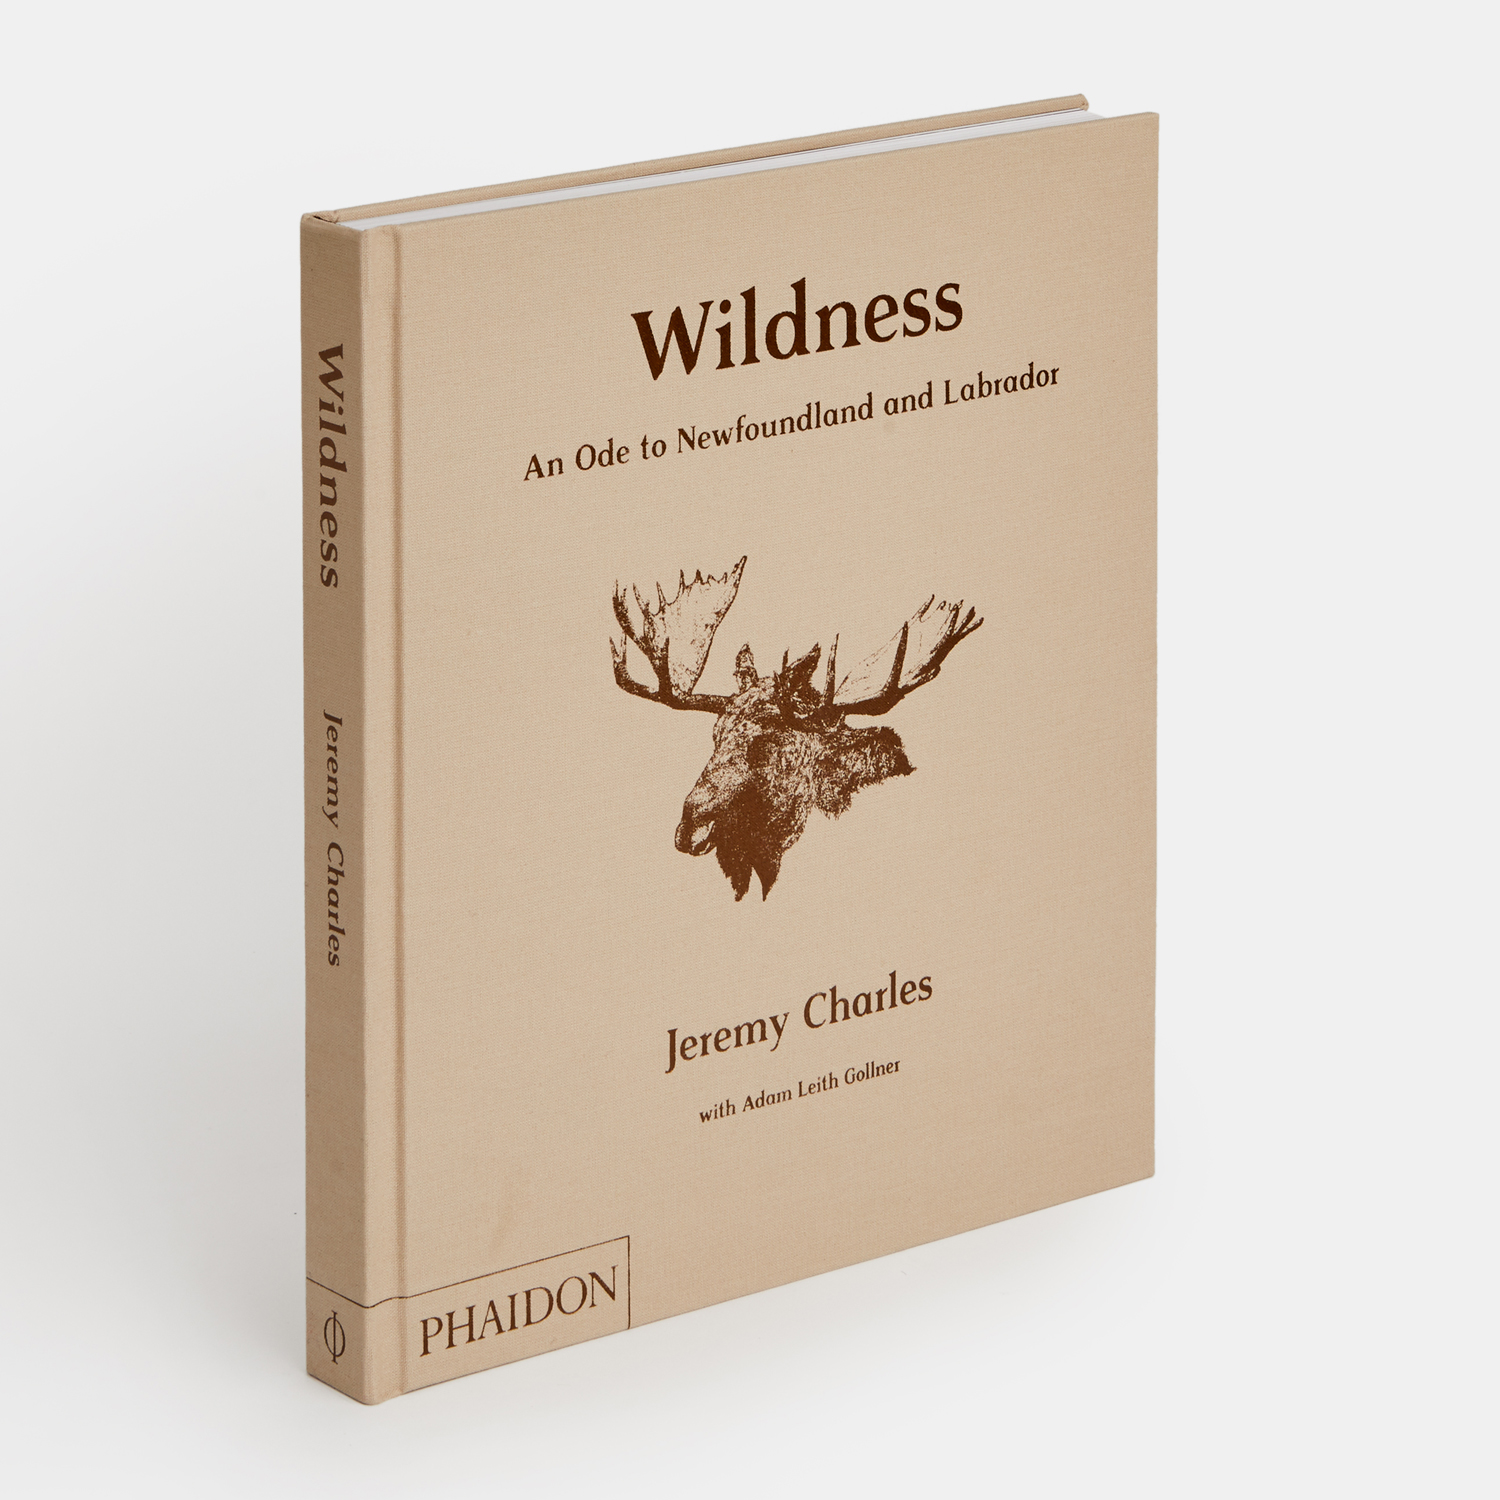 Wildness: An Ode to Newfoundland and Labrador by Jeremy Charles